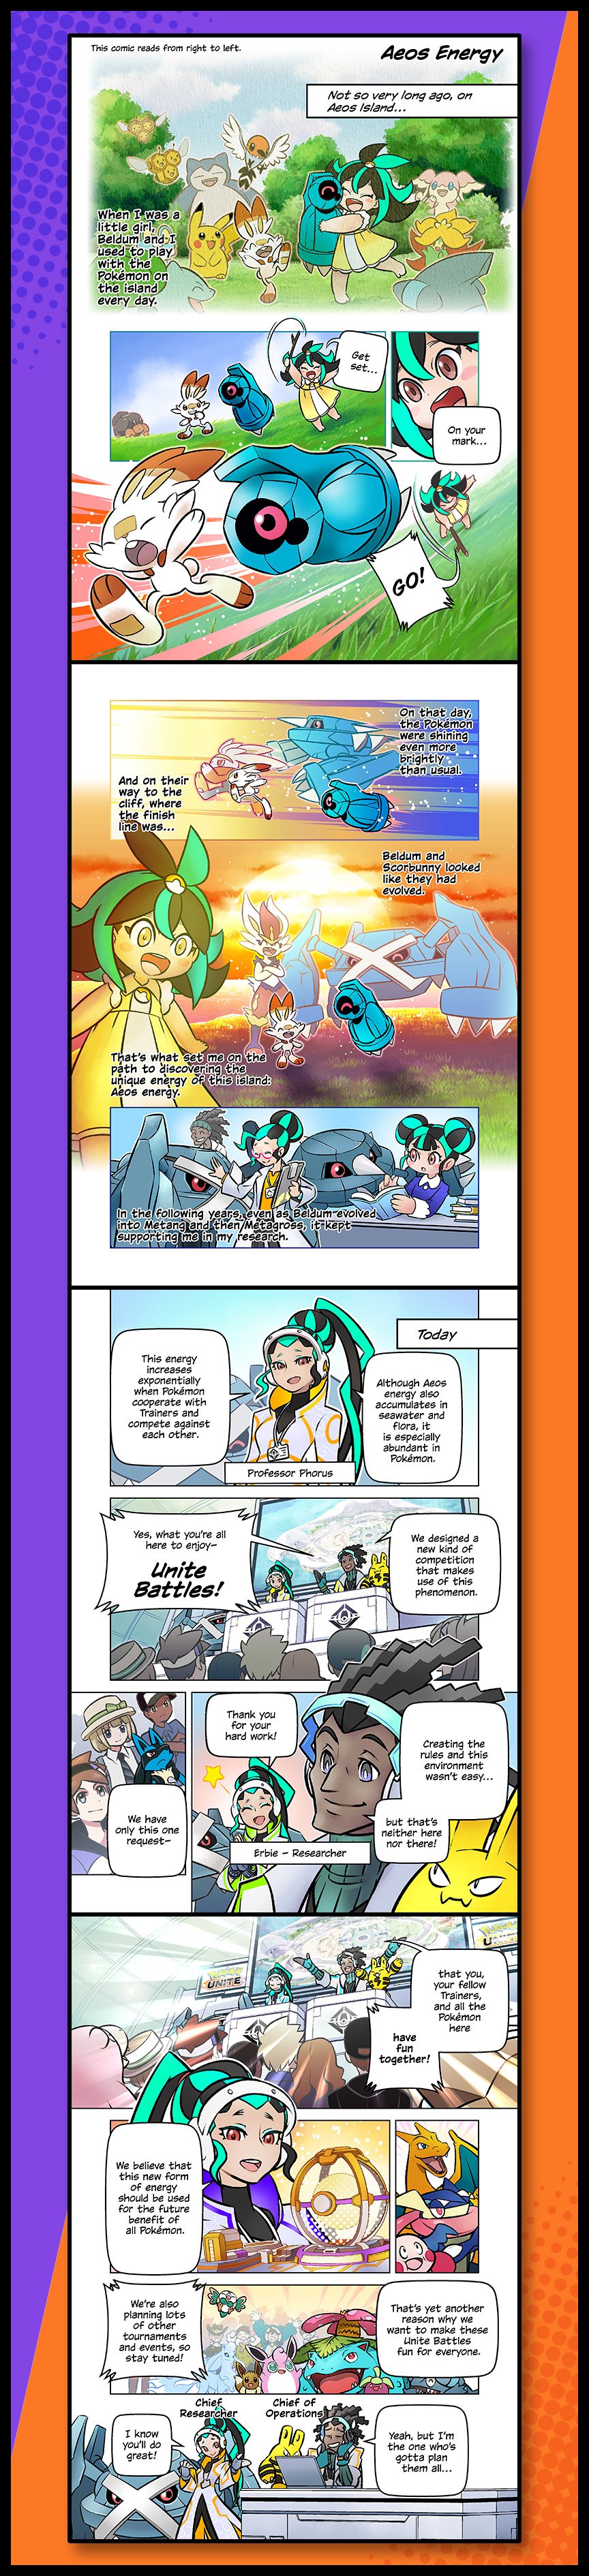 Chapter 1: Aeos Energy. 1. Not so very long ago, on Aeos Island…  Narrator: When I was a little girl, Bedlum and I used to play with the Pokémon on the island every day. 2. Girl: On your mark, get set…GO! 3: Narrator: On that day, the Pokémon were shining even more brightly that usual. And on the way to the cliff, where the finish line was… 4: Narrator: Bedlum and Scorbunny looked like they had evolved. That’s what set me on the path to discovering the unique energy of this island: Aeos energy.  5: Narrator: In the following years, even as Bedlum evolved into Metang and then Metagross, it kept supporting me in my research. 6: Today. Professor Phorus to audience: Although Aeos energy also accumulates in seawater and flora, it is especially abundant in Pokémon. This energy increase exponentially when Pokémon cooperate with Trainers and compete against each other. 7: Erbie: We designed a new kind of competition that makes use of this phenomenon—Unite Battles! 8: Creating the rules and this environment wasn’t easy, but that’s neither here nor there. Phorus: Thank you for your hand work! Erbie: We have only this one request— 9: that you, your fellow trainers, and all the Pokémon here have fun together! 10: Phorus: We believe that this new form of energy should be used for the future benefit of all Pokémon. 11: That’s yet another reason why we want to make these Unite battles fun for everyone. We’re also planning lots of other tournaments and events, so stay tuned! 12: I know you’ll do great! Erbie: Yeah, but I’m the one who’s gotta plan them all…